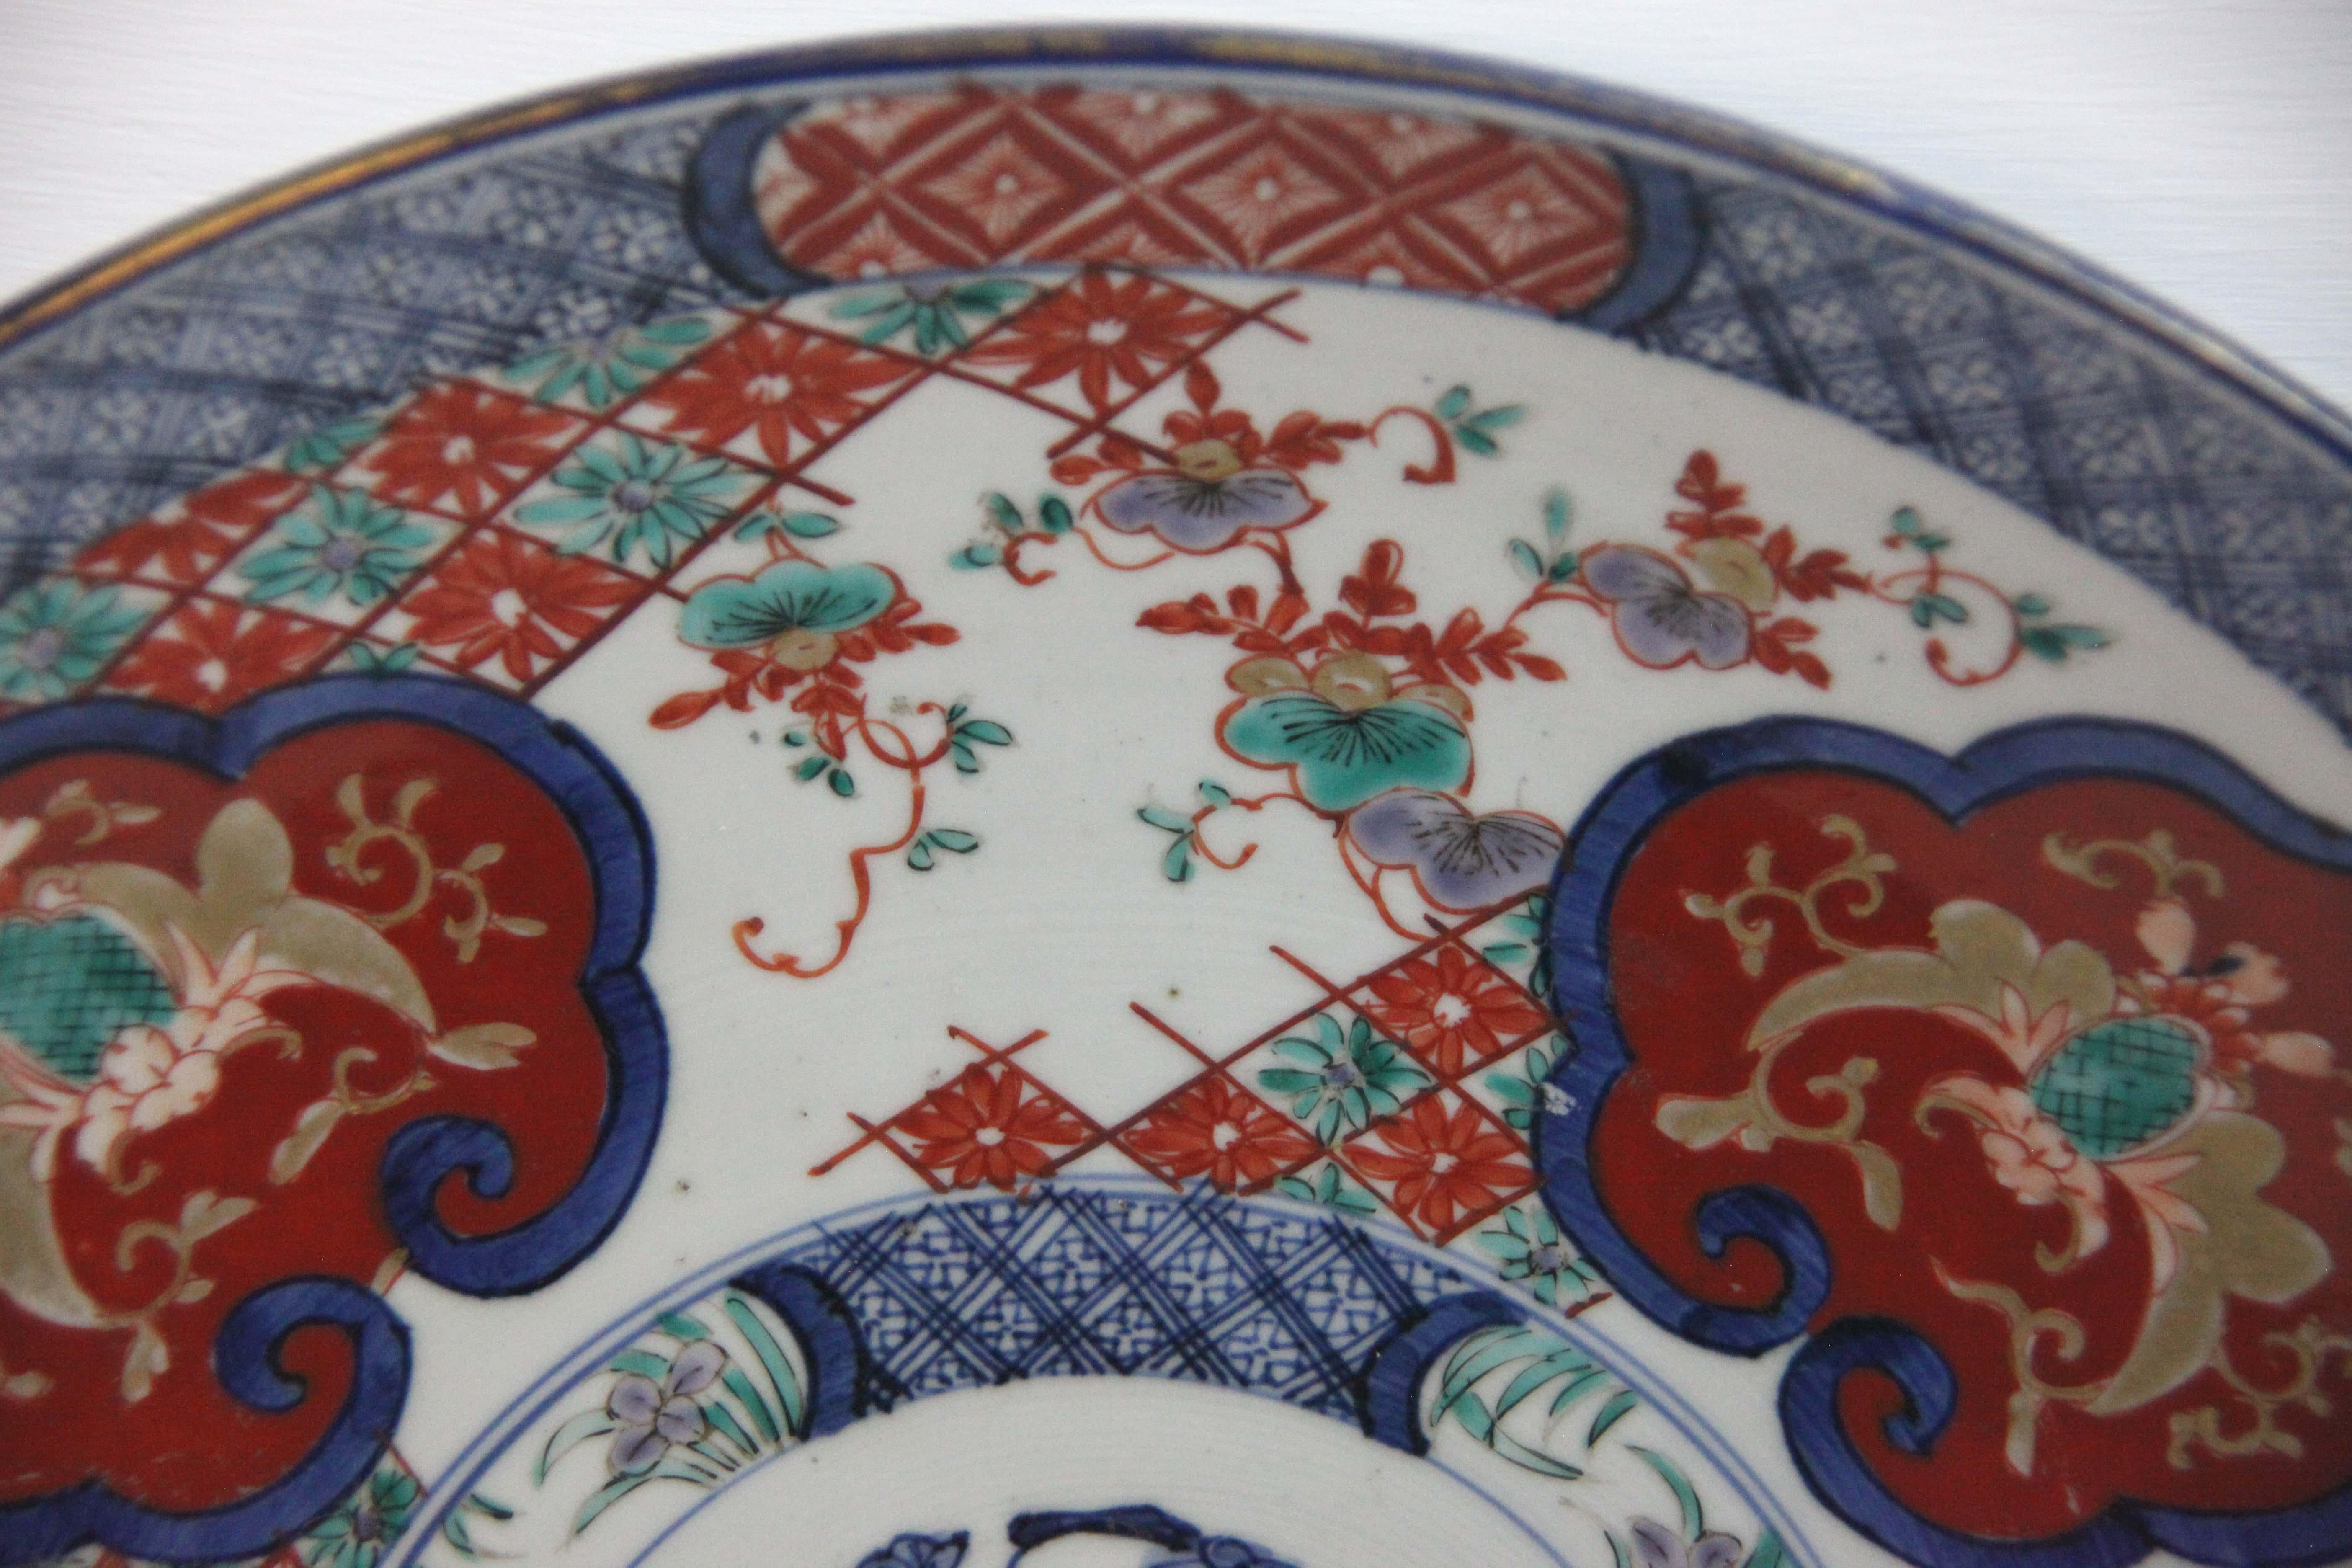 19th century Japanese Imari charger, with central medallion surrounded by stylized panels and floral work.